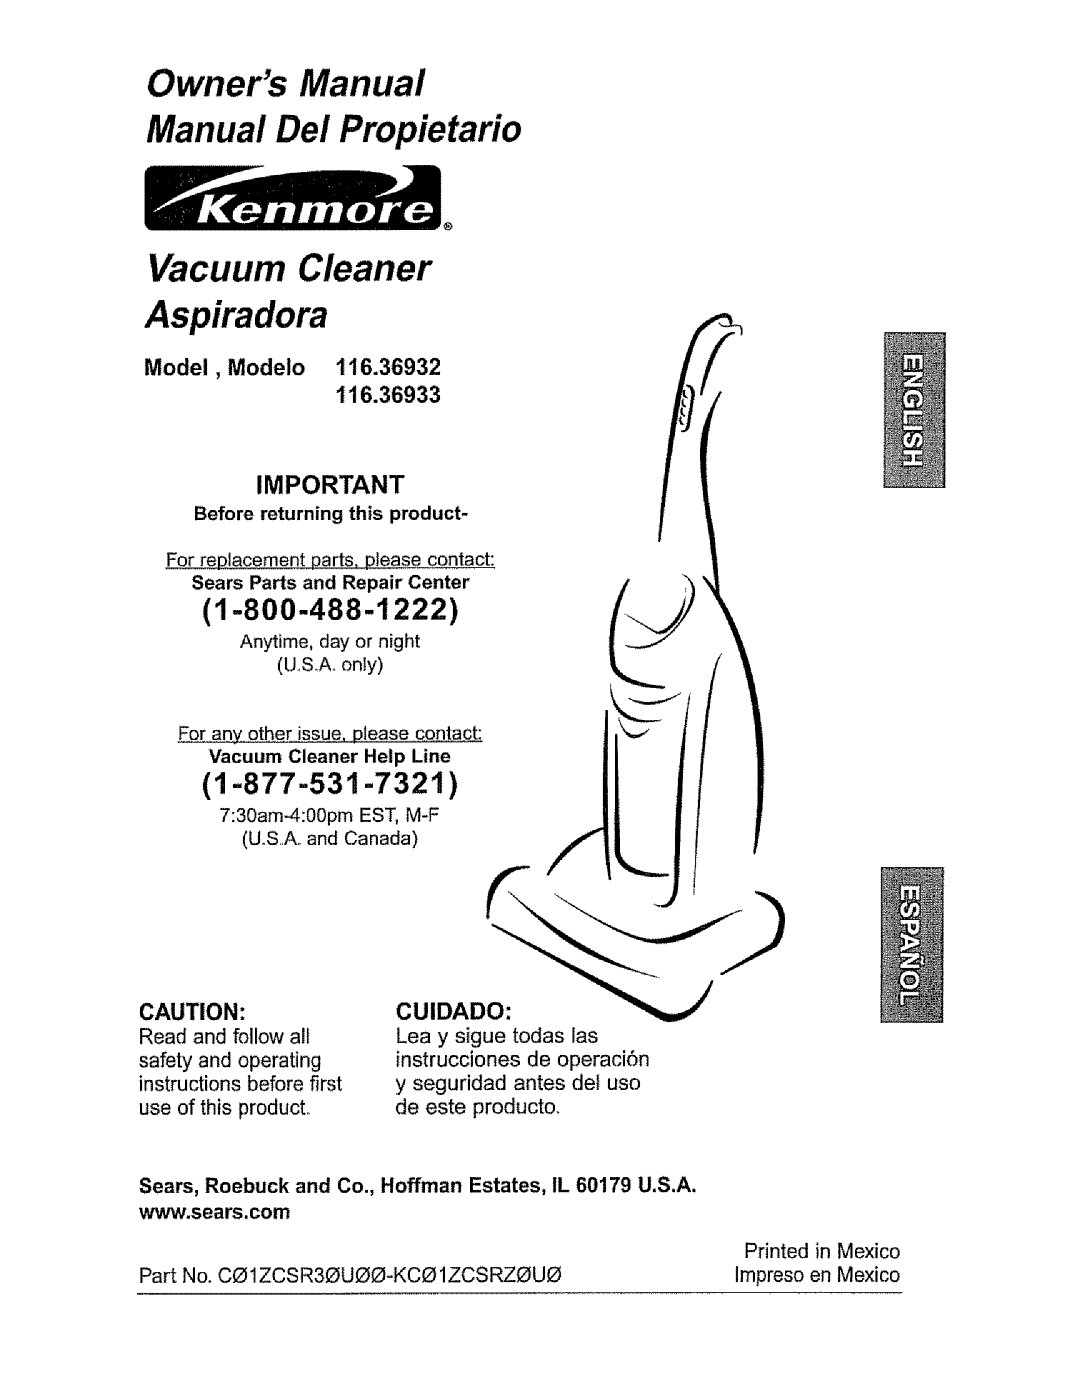 Kenmore 116.36933 owner manual 1=800-488-1222, Model, Modelo, Before returning this product, Sears Parts and Repair Center 